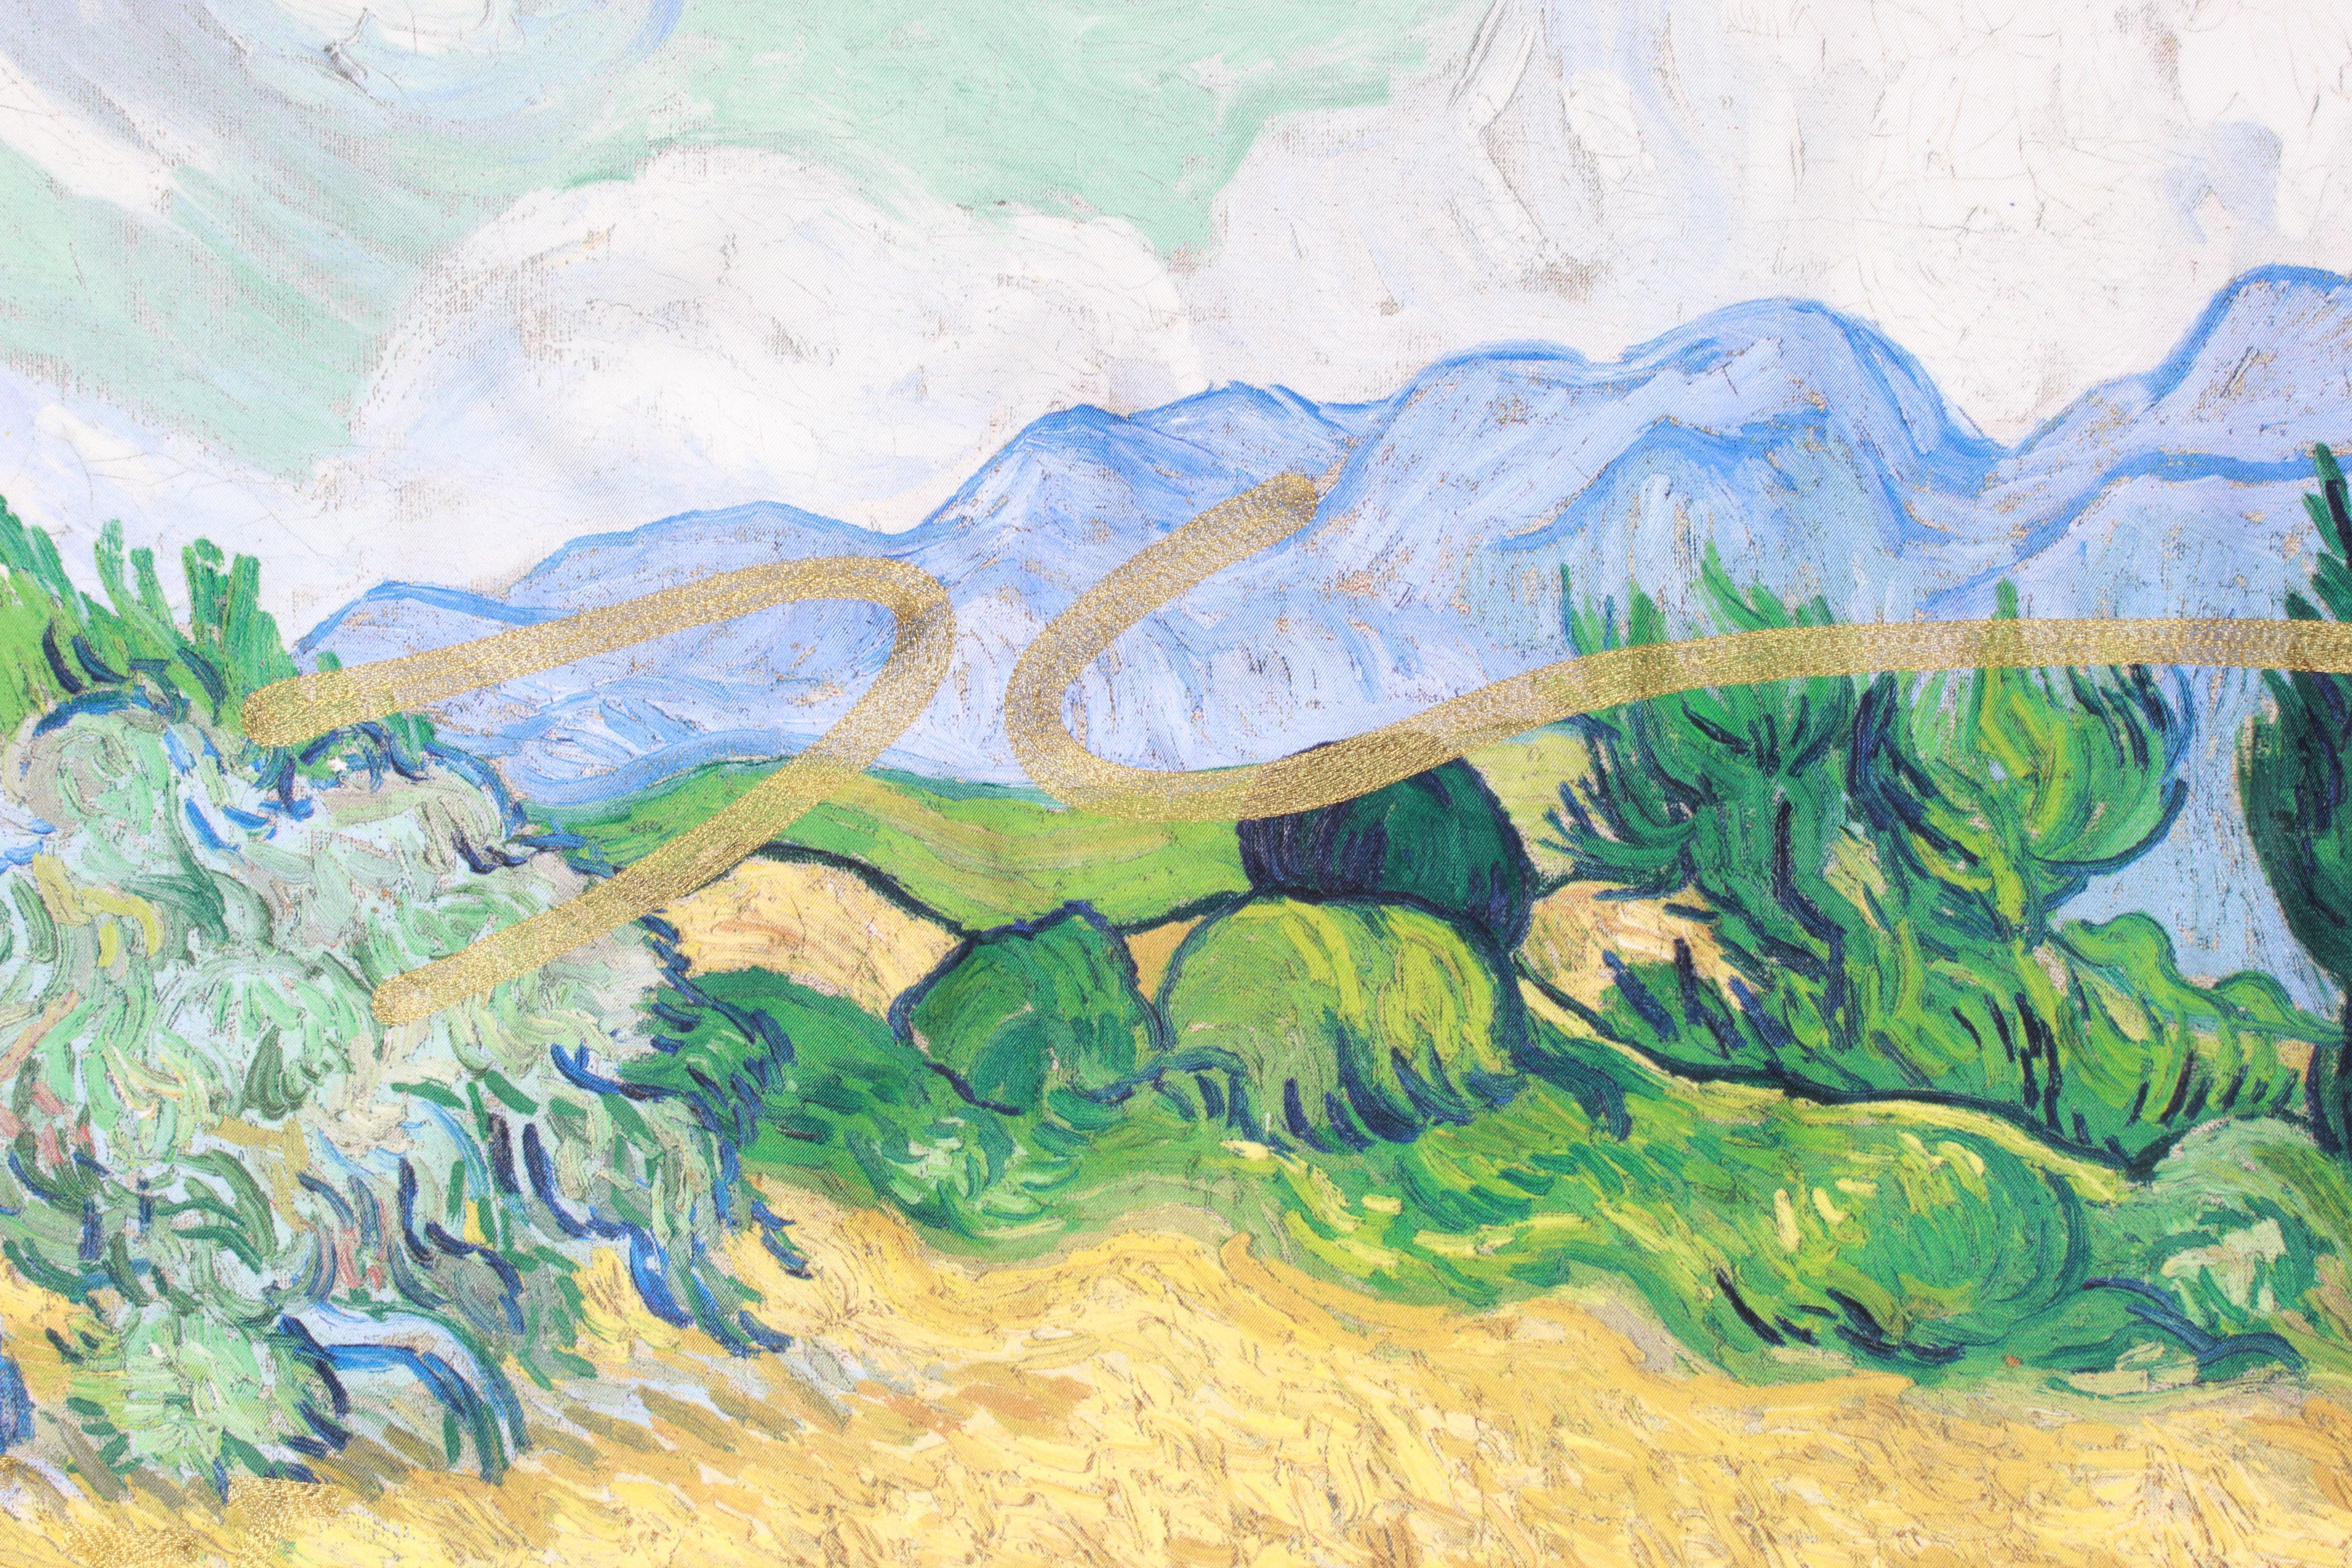 From the Louis Vuitton X Jeff Koons Masters Collection, Van Gogh's A Wheatfield with Cypresses Silk Scarf.

The scarf is detailed with gold embroidery, featuring Koons re-imagining the of Louis Vuitton monogram to include his own initials. This